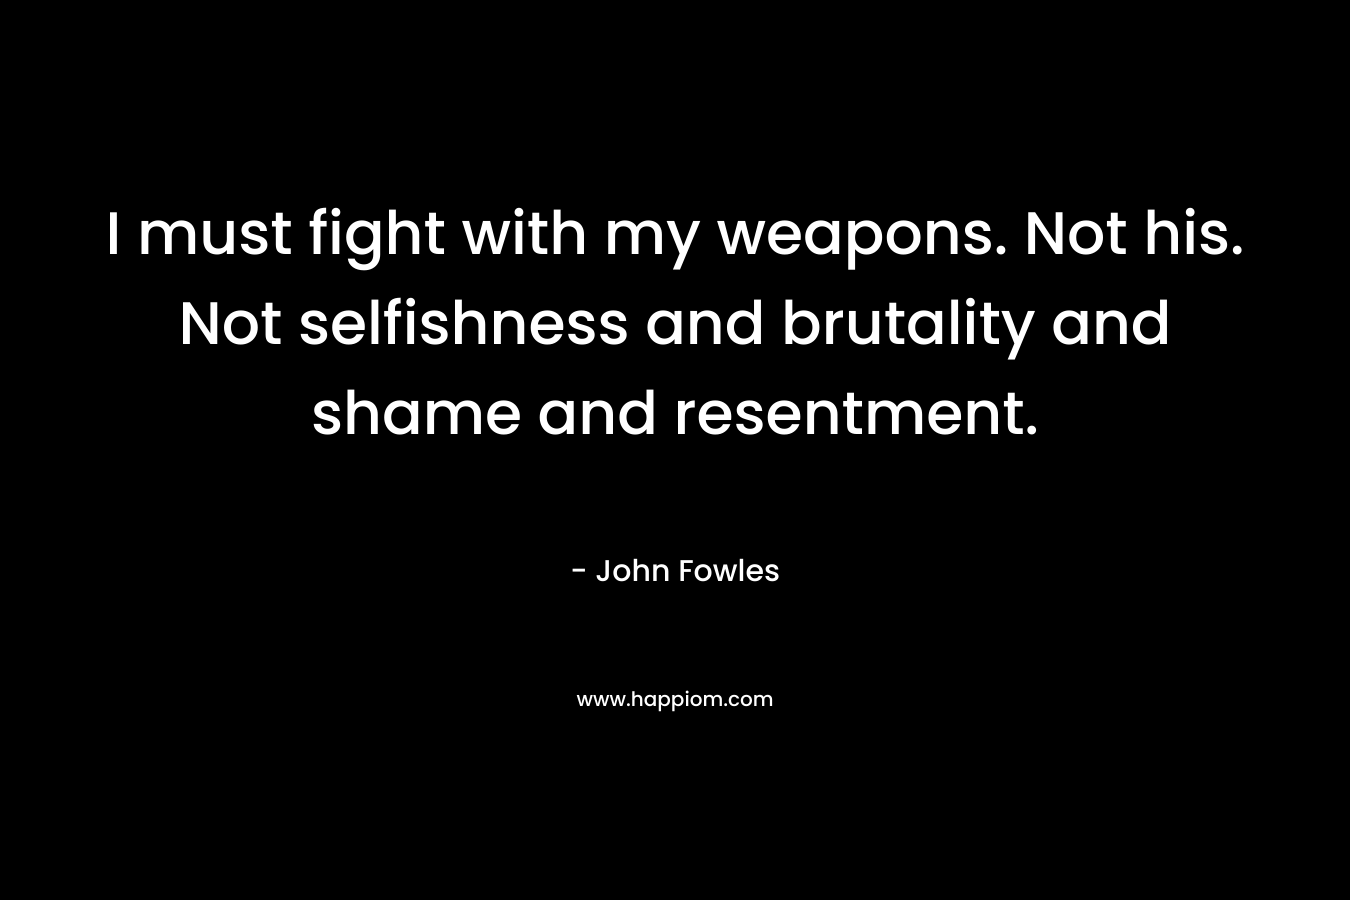 I must fight with my weapons. Not his. Not selfishness and brutality and shame and resentment. – John Fowles